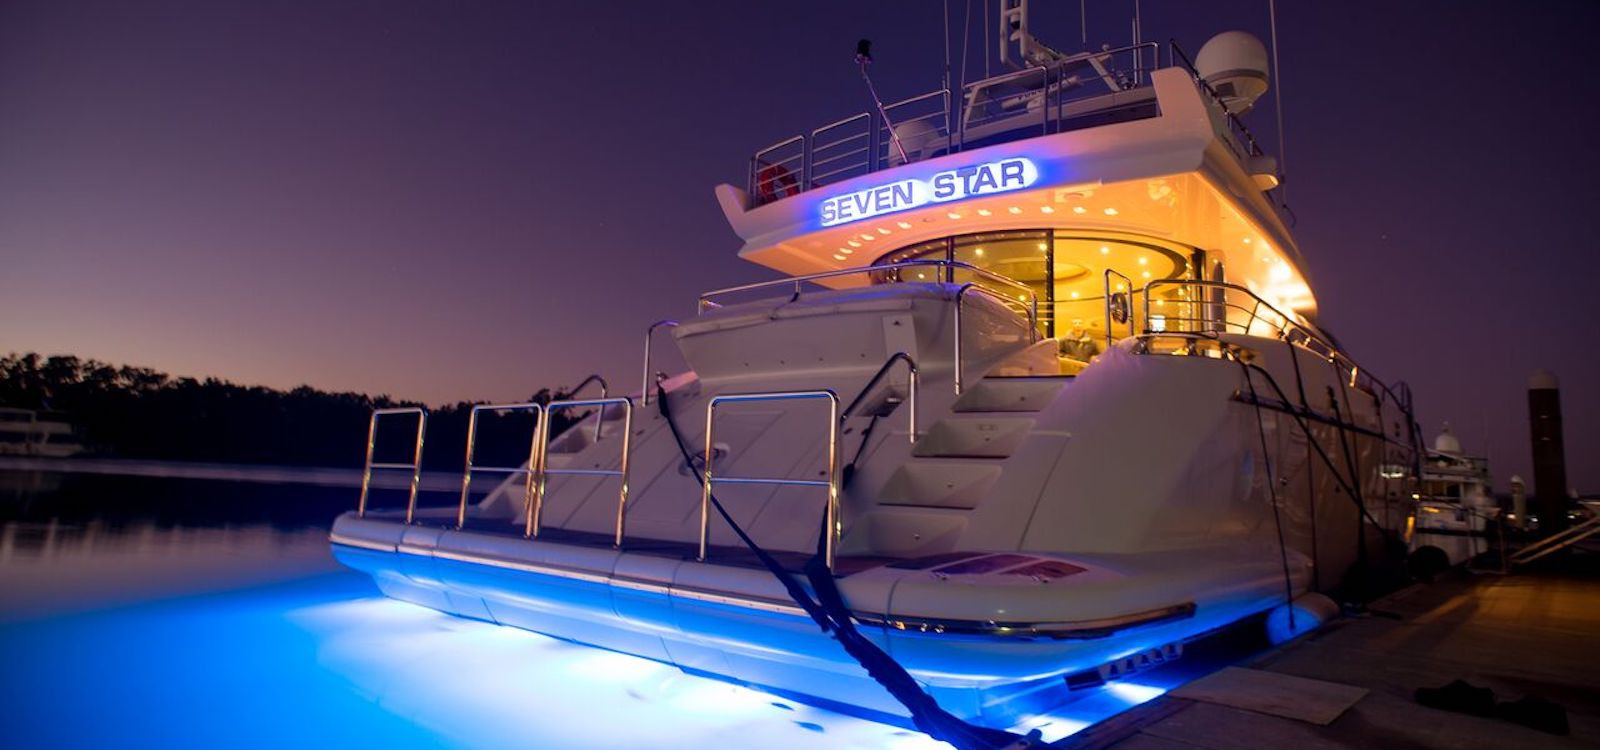 Night Lights on for luxury boat hire on Seven Star